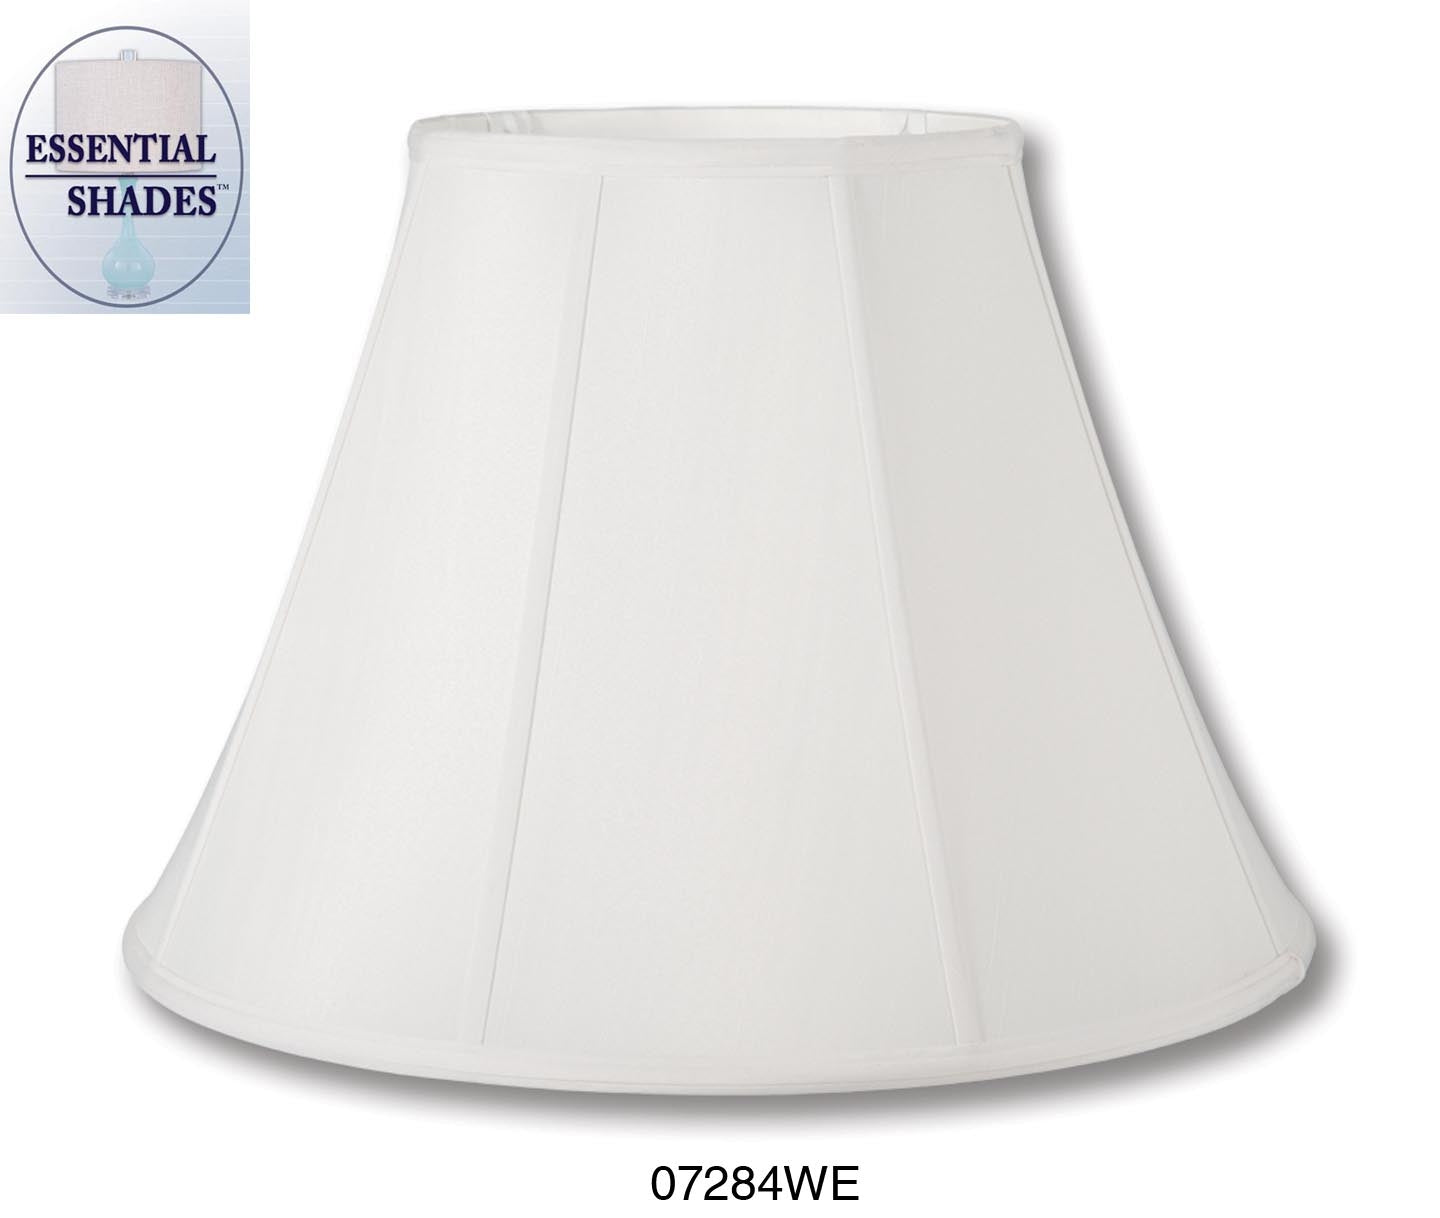 Essential Shades Brand Basic Empire, Value Lamp Shades - Choice of Color